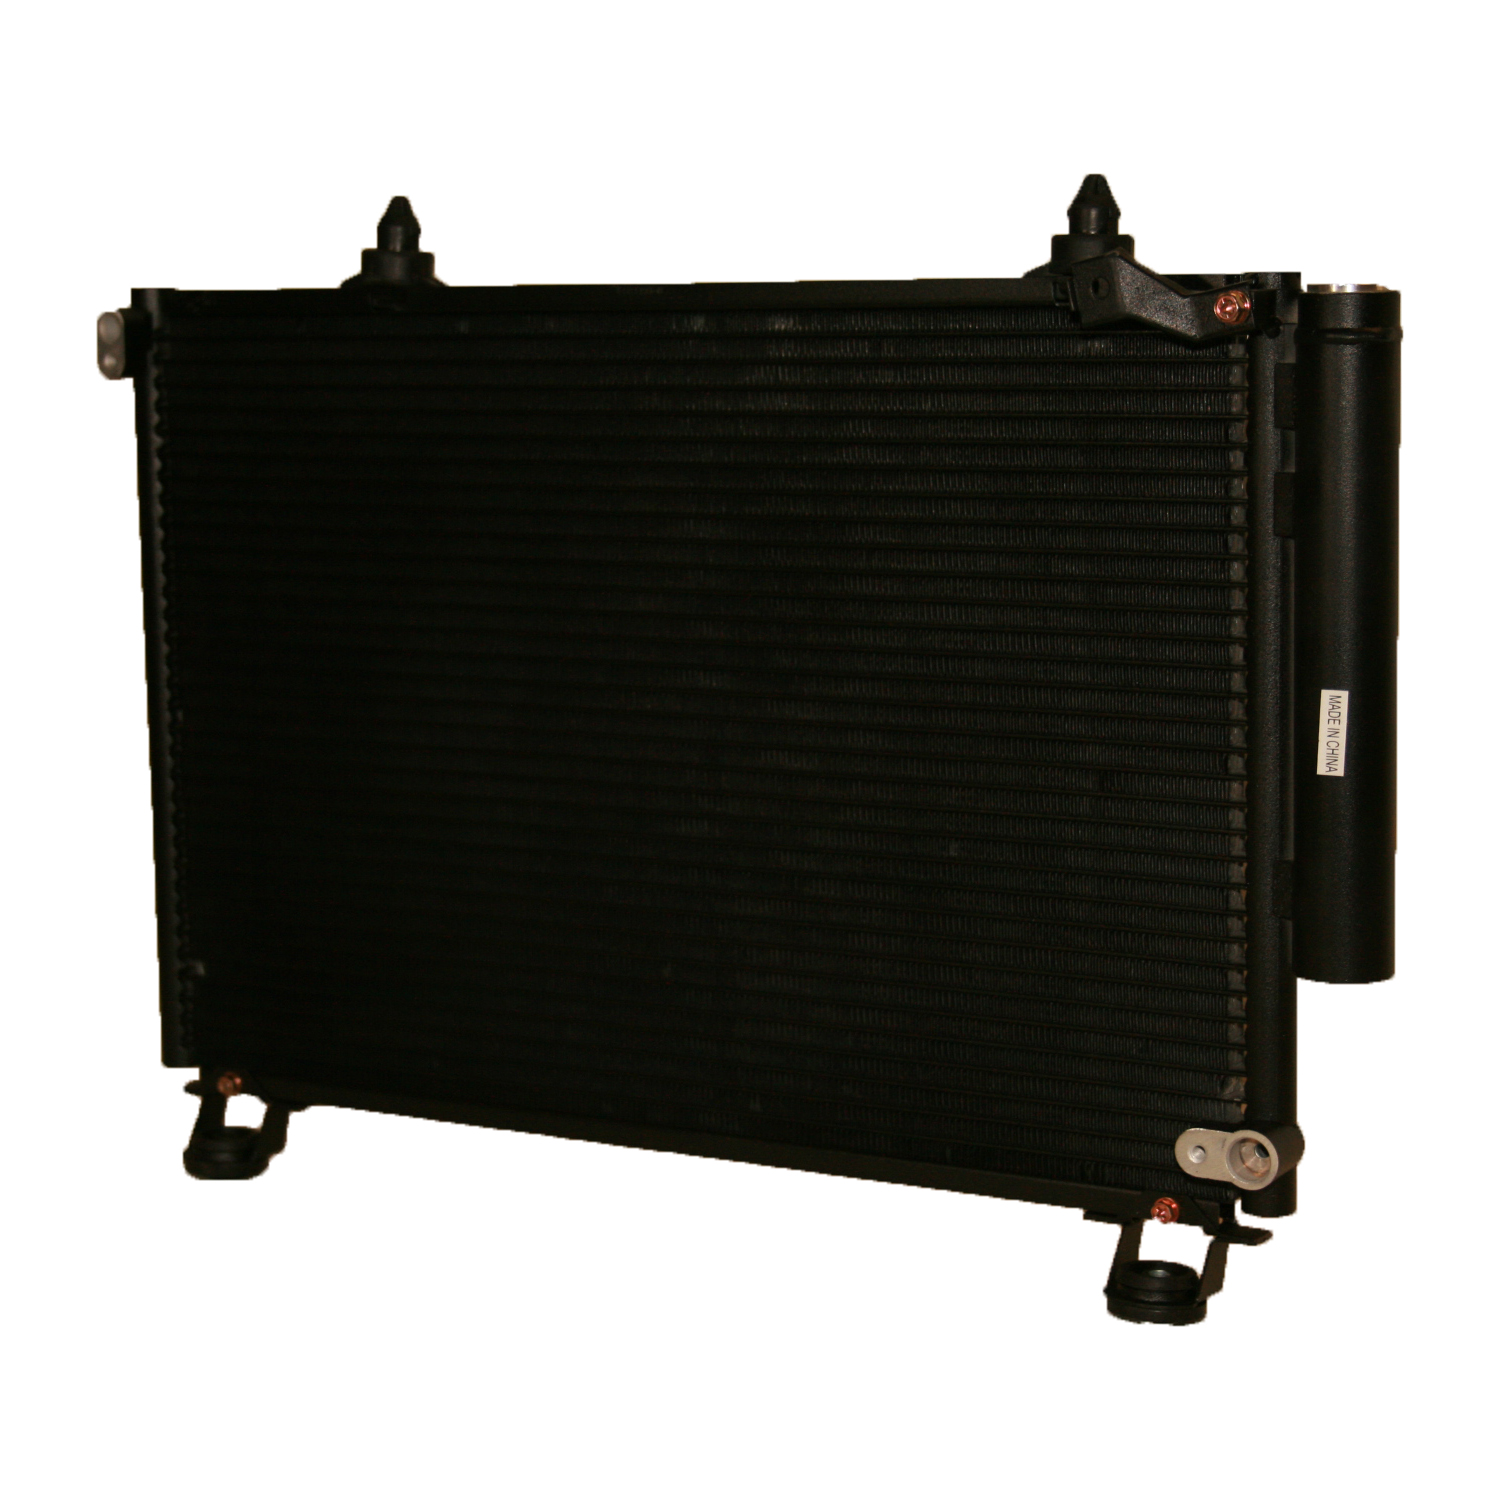 TCW Condenser 44-3300 New Product Image field_60b6a13a6e67c